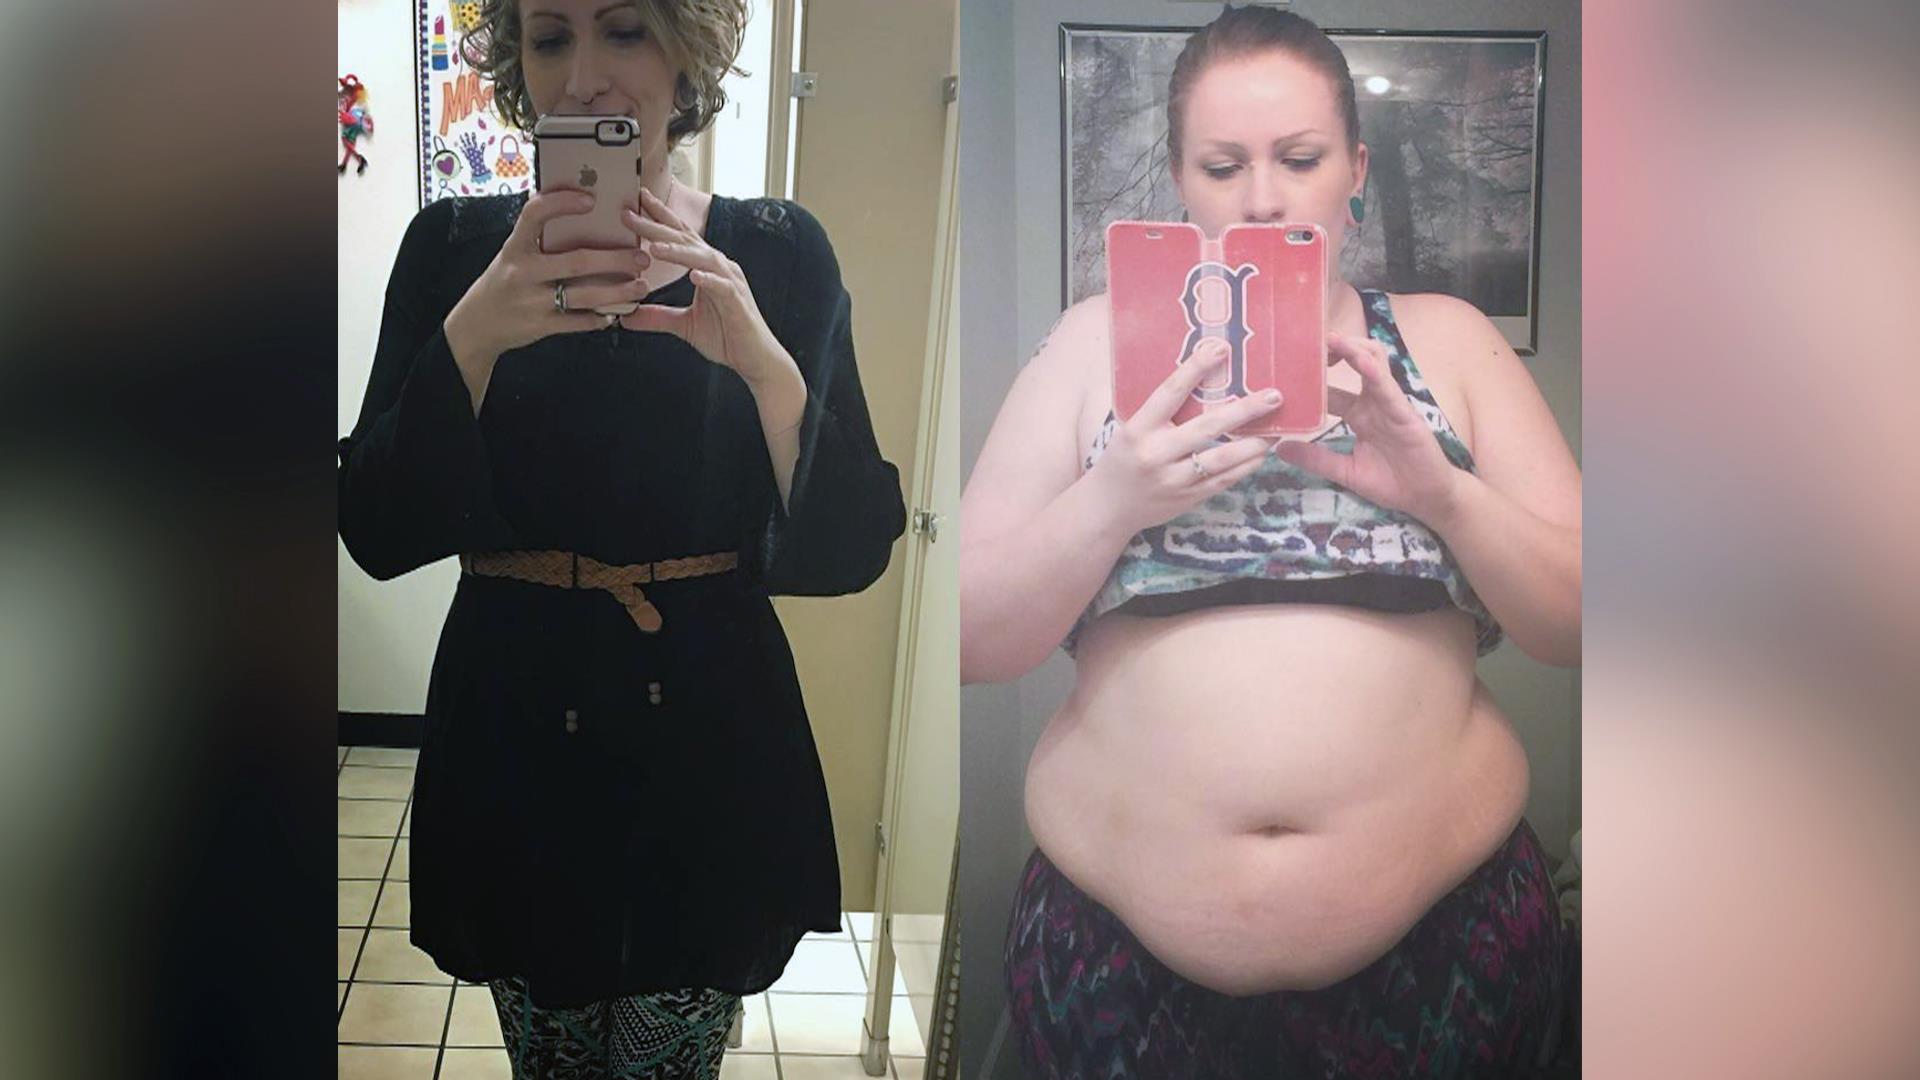 This woman lost 110 pounds - and feels better than ever.